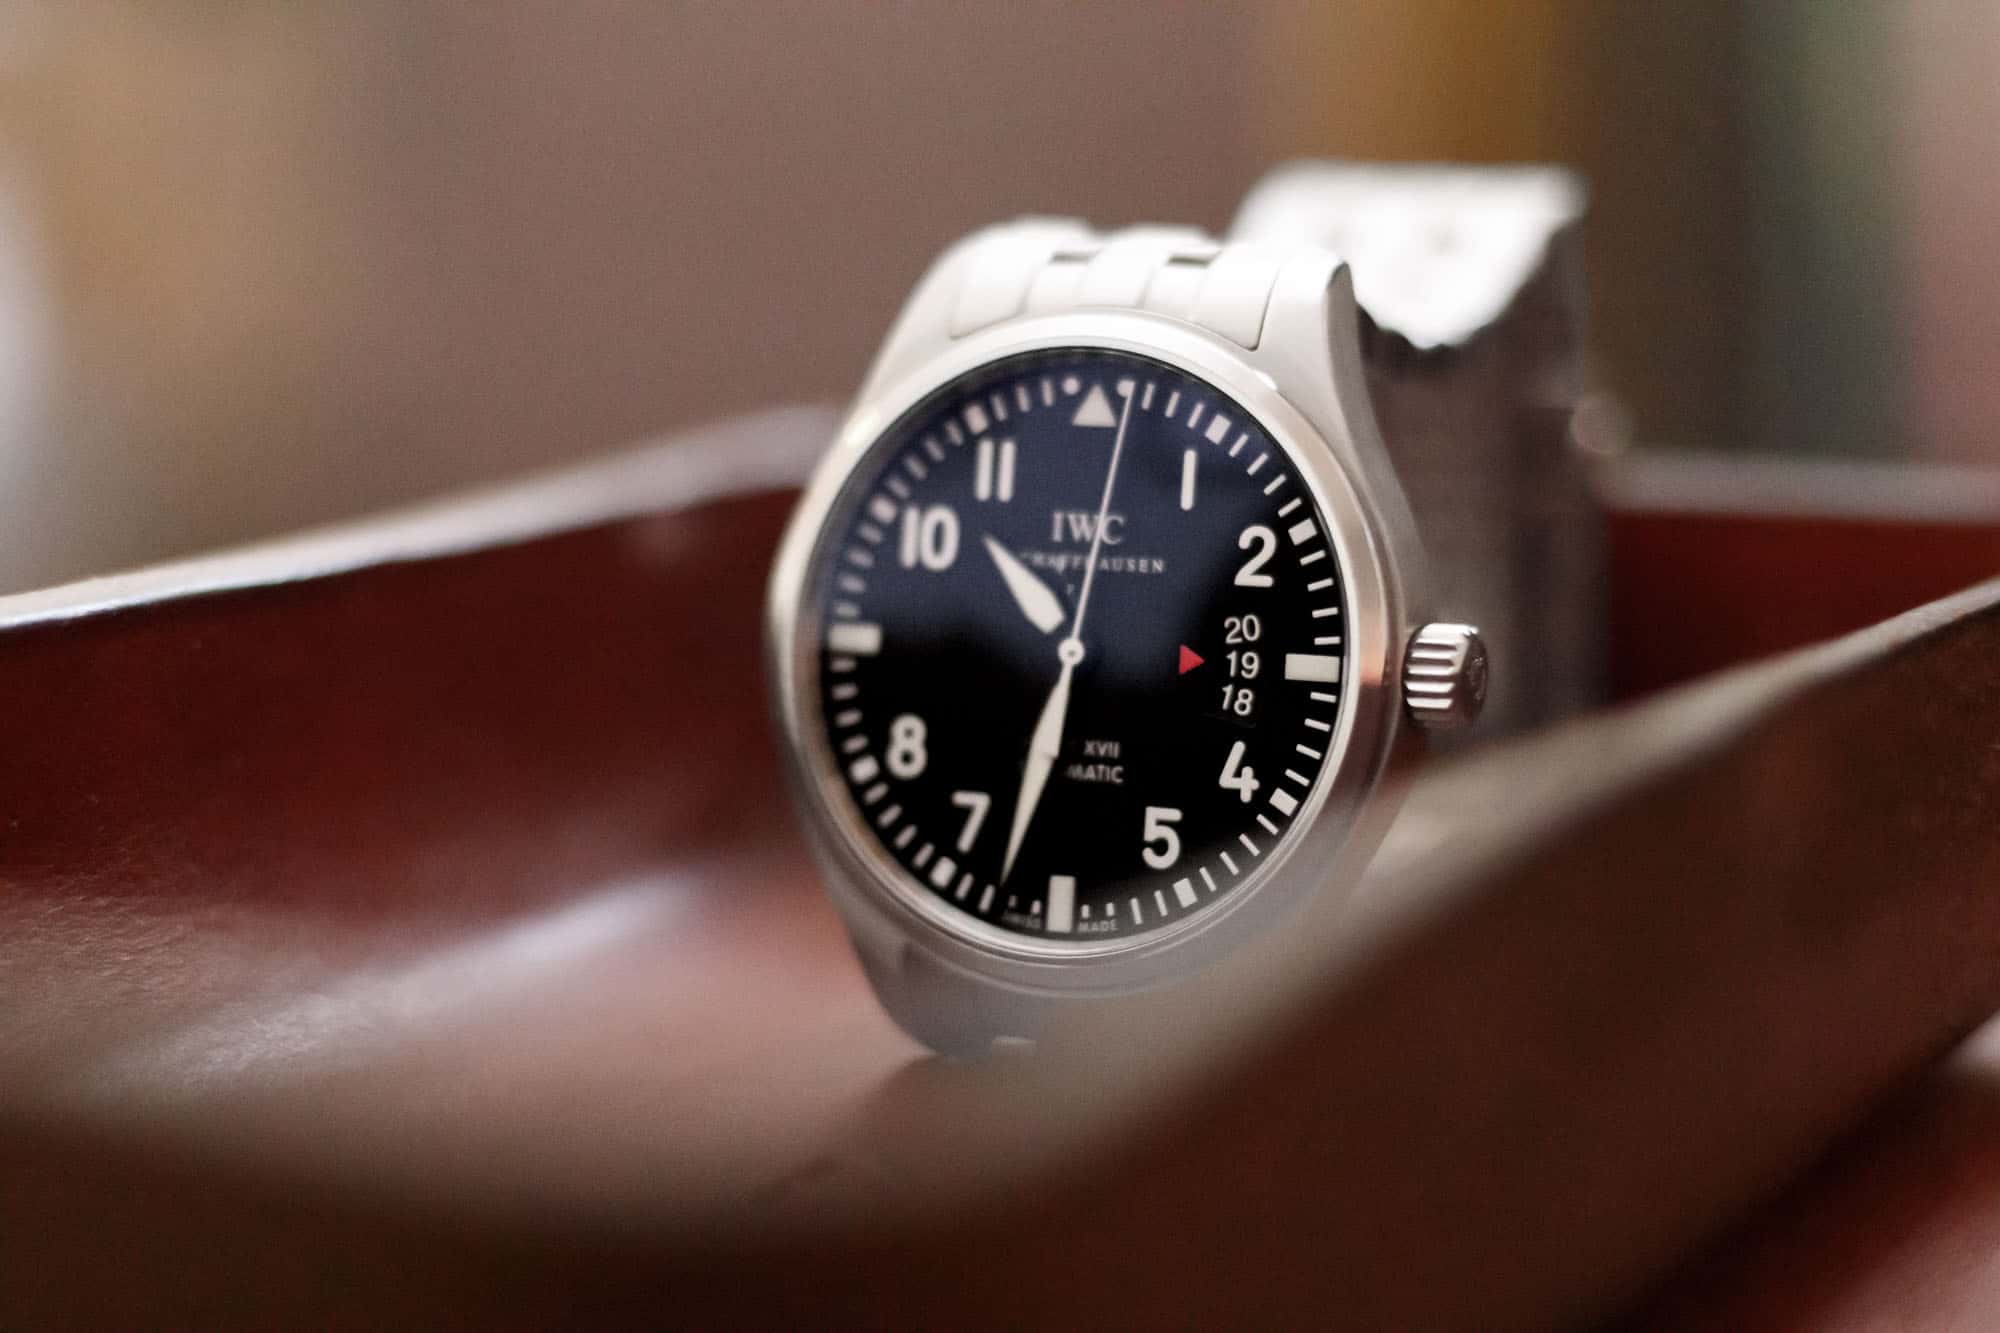 Missed Review: The IWC Mark XVII - Worn & Wound